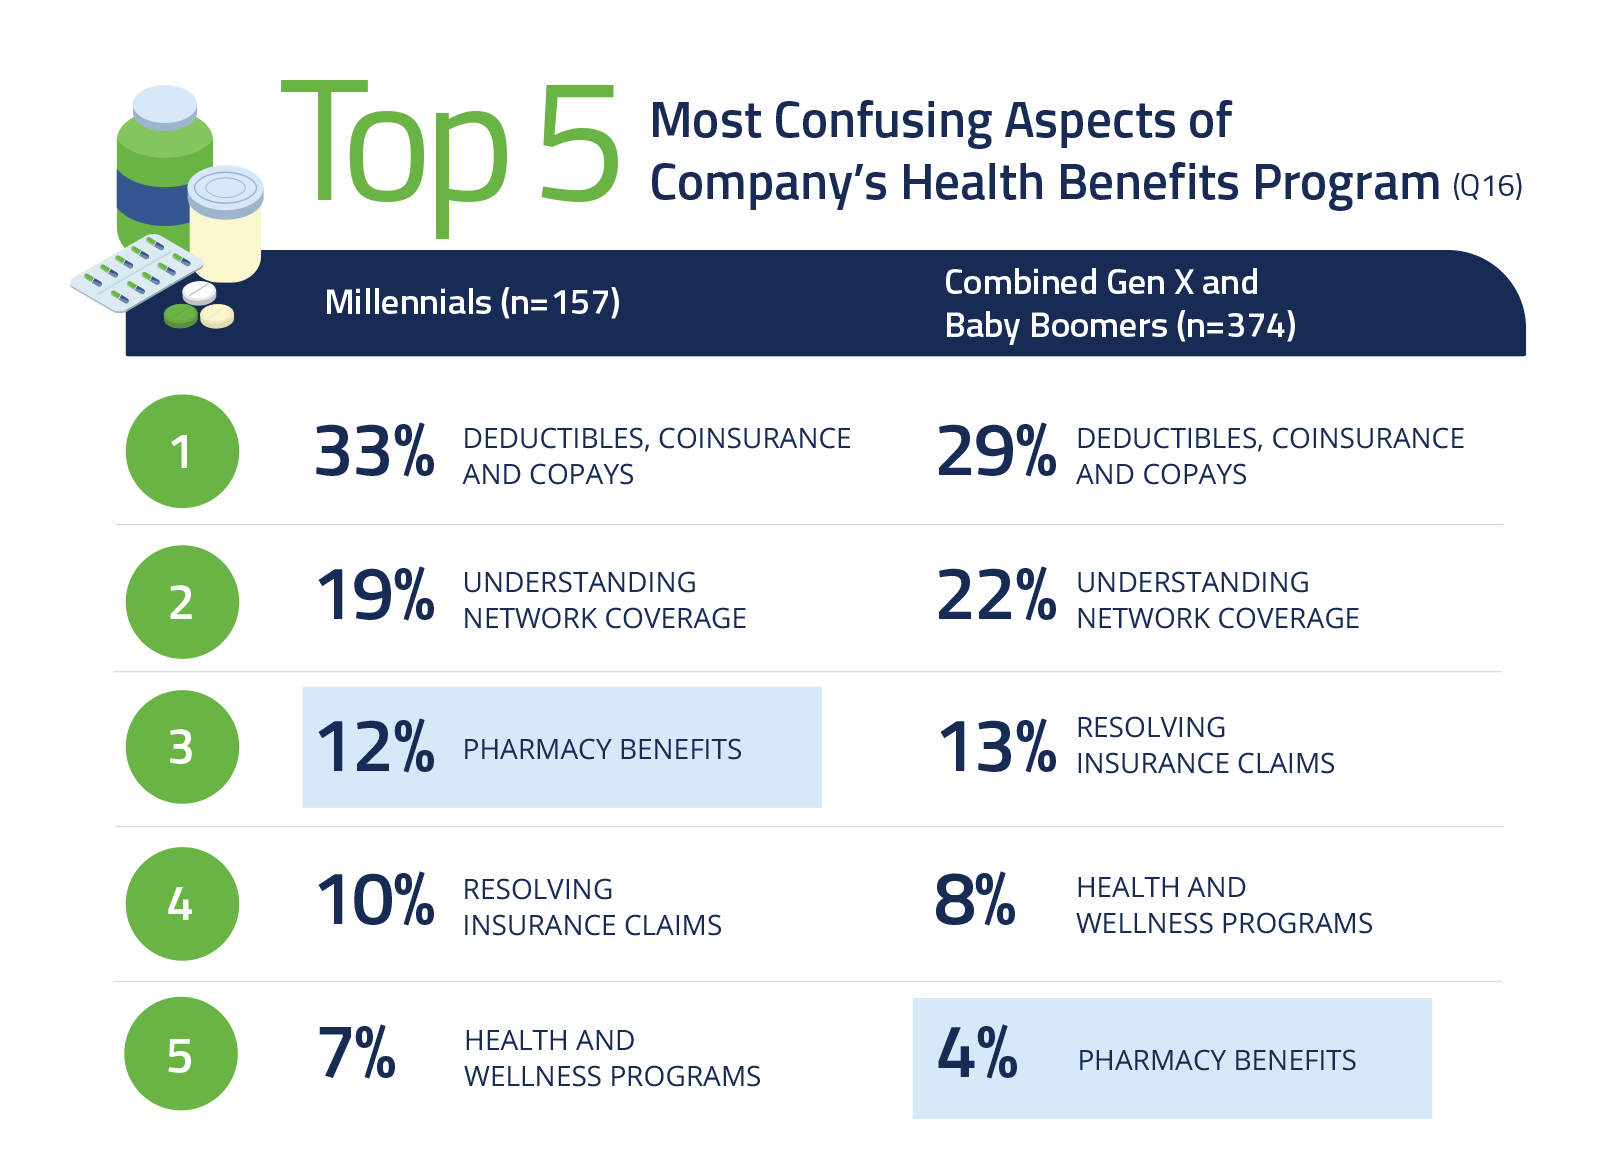 Chart: Top 5 Most Confusing Aspects of Company’s Health Benefits Program